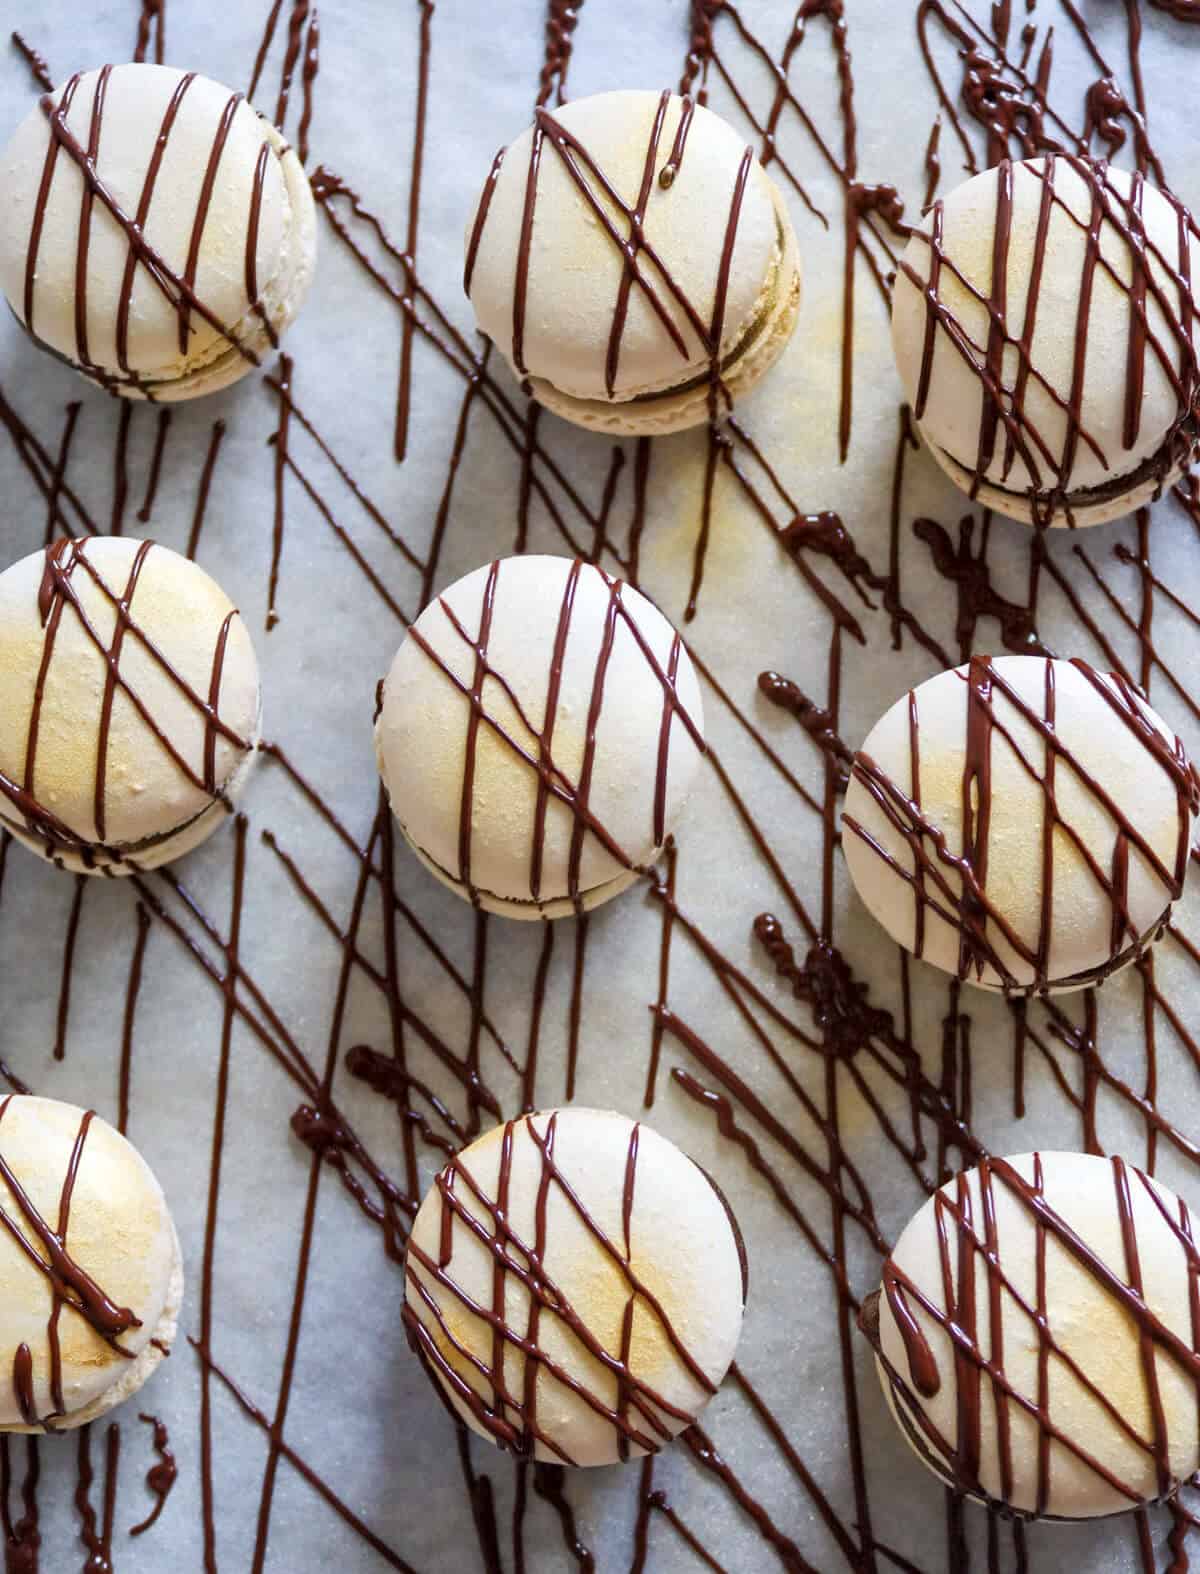 Macarons decorated with piped chocolate.